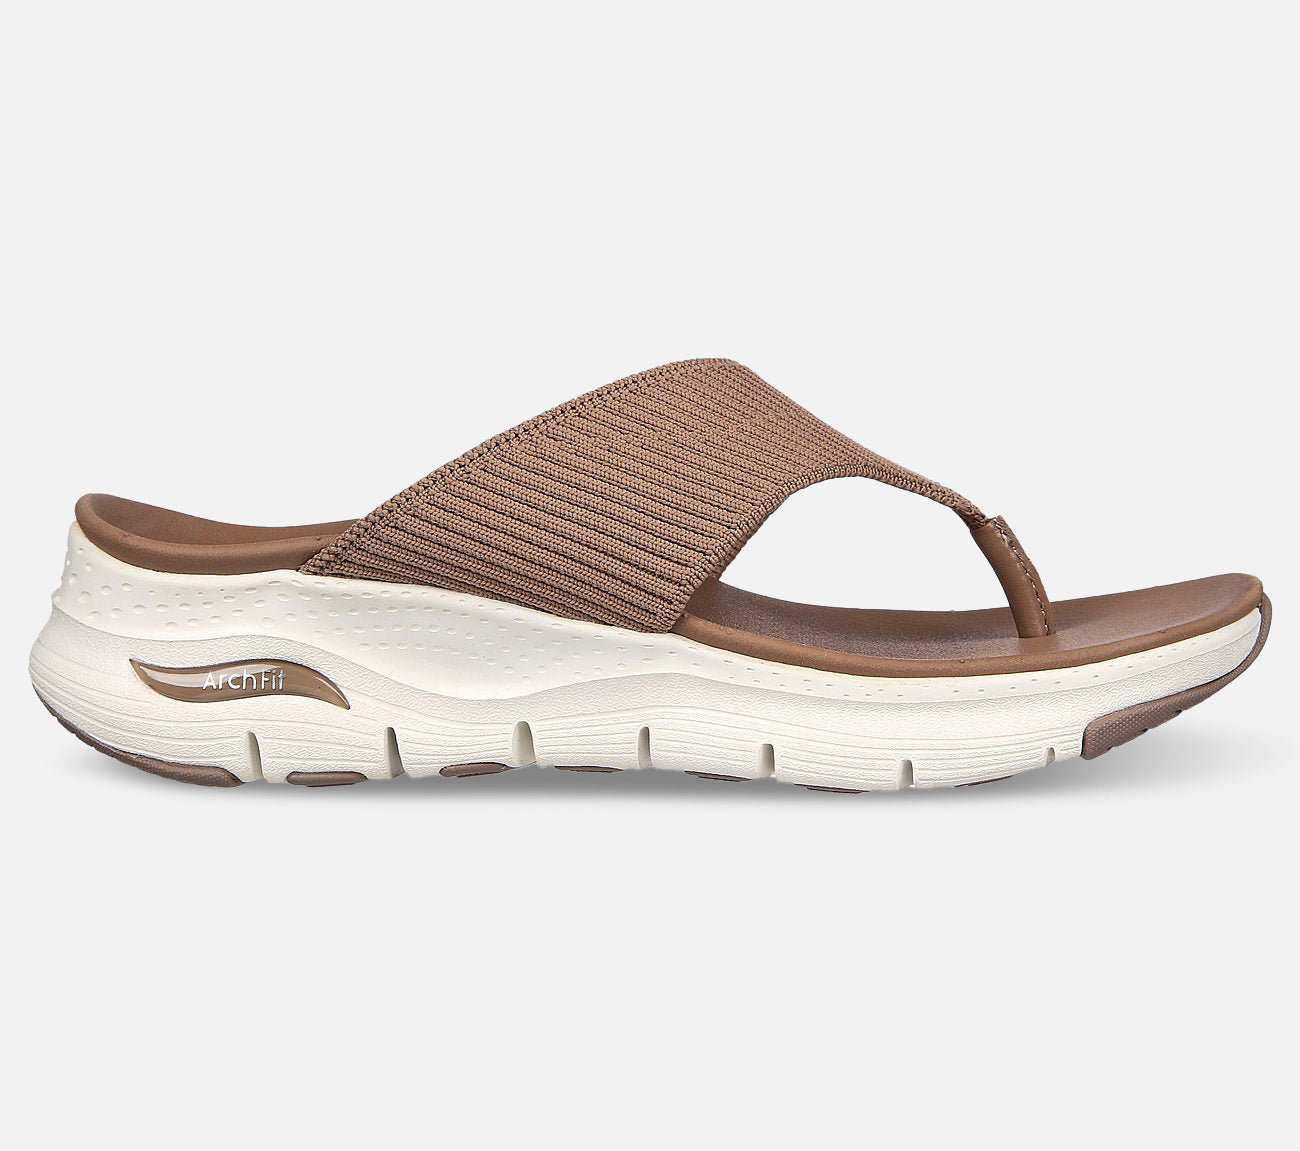 Arch Fit - Easy Day Sandal Skechers